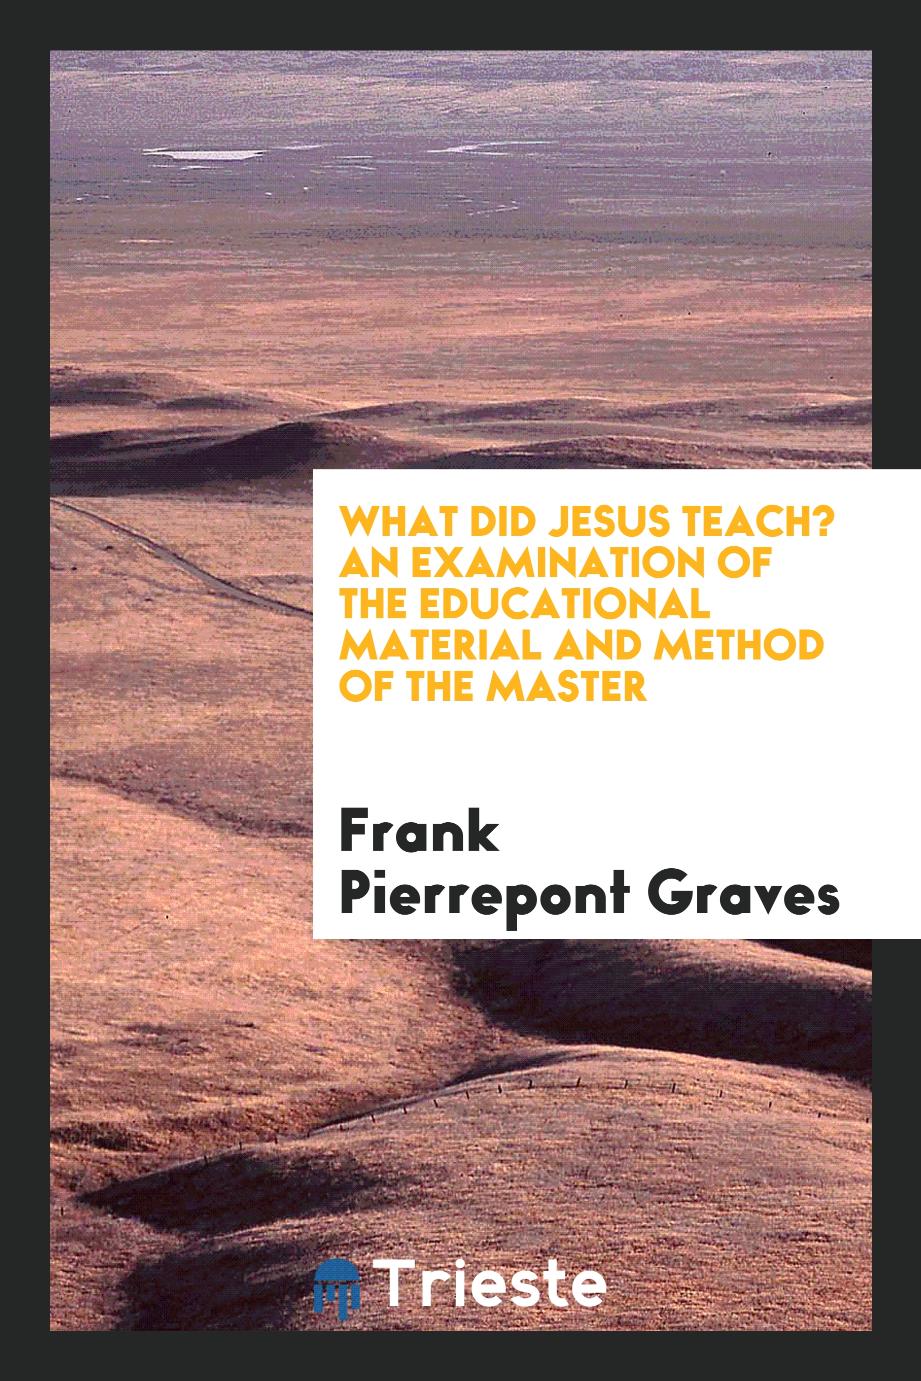 What did Jesus teach? an examination of the educational material and method of the master